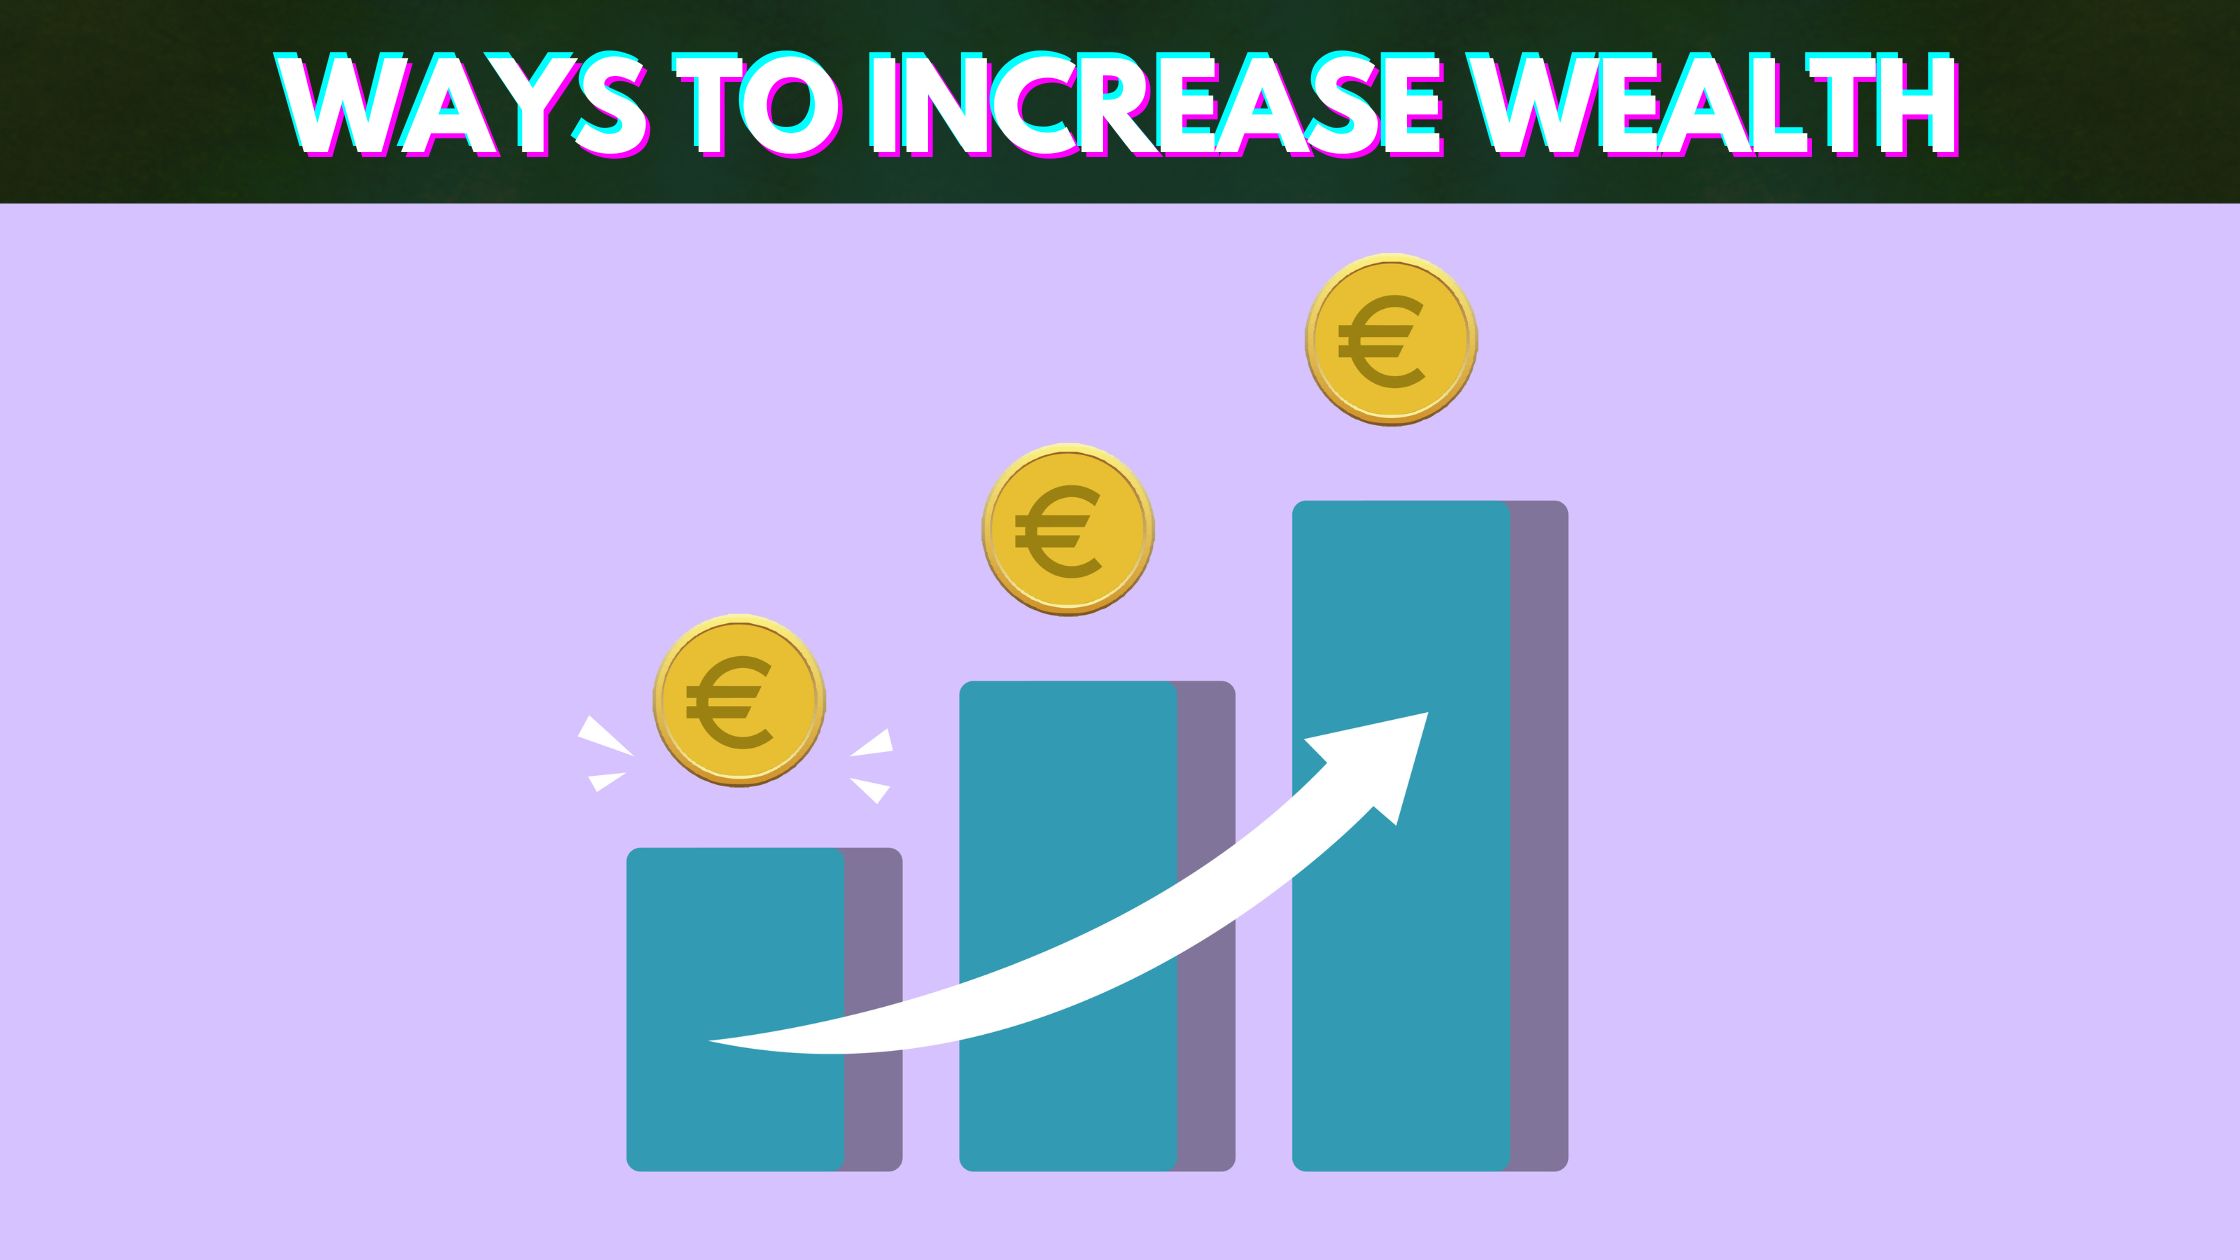 Ways to Increase Wealth